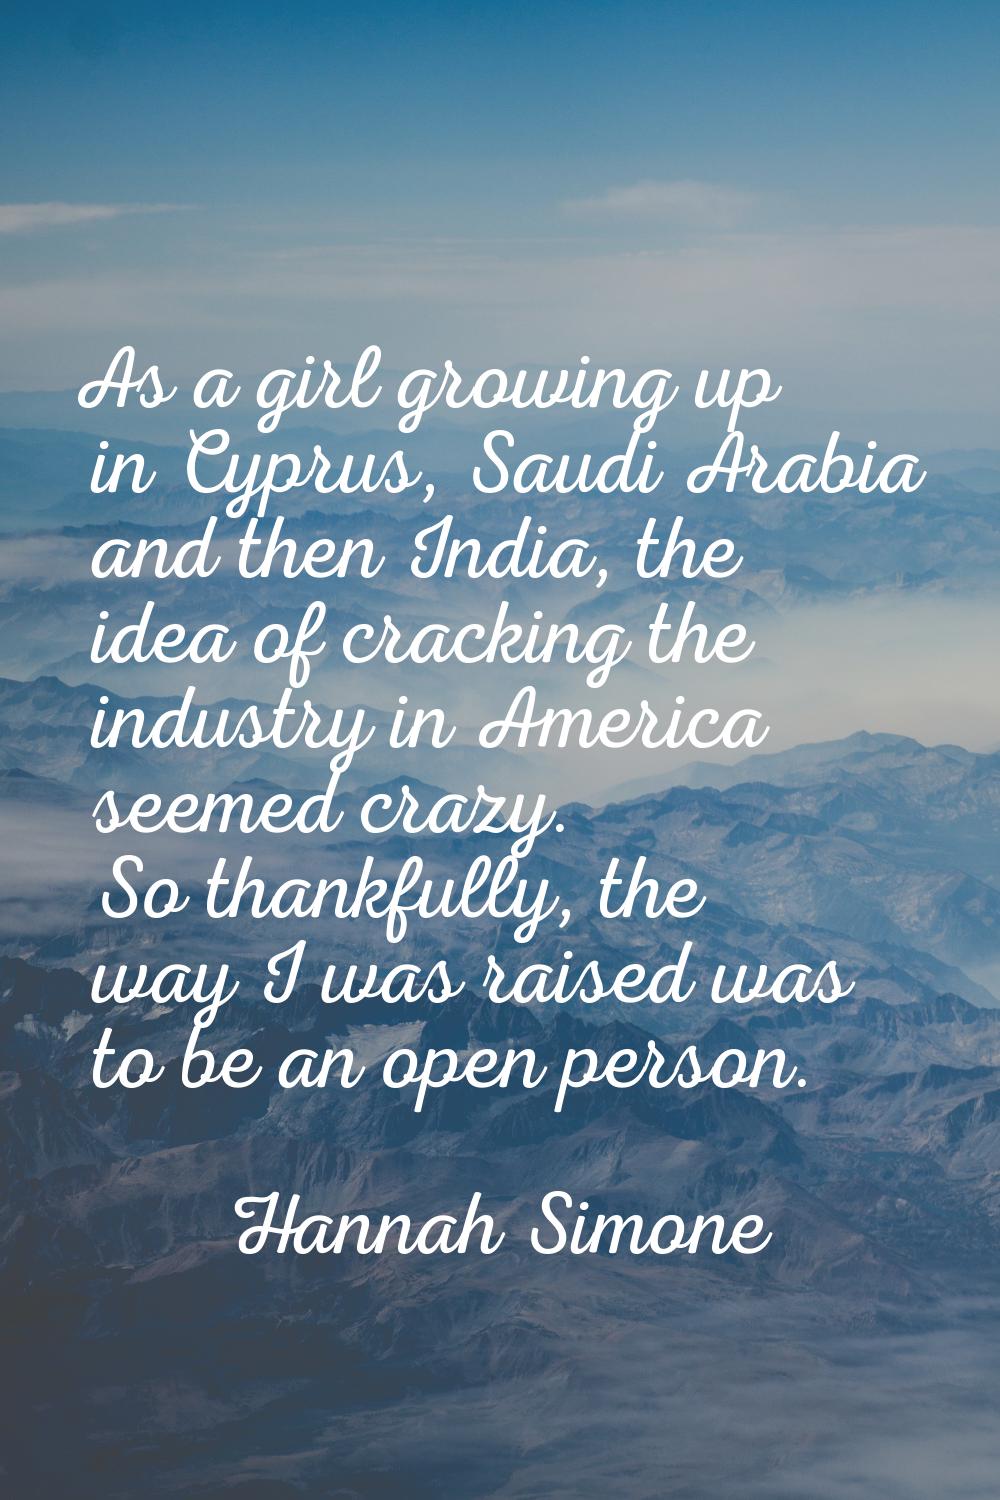 As a girl growing up in Cyprus, Saudi Arabia and then India, the idea of cracking the industry in A